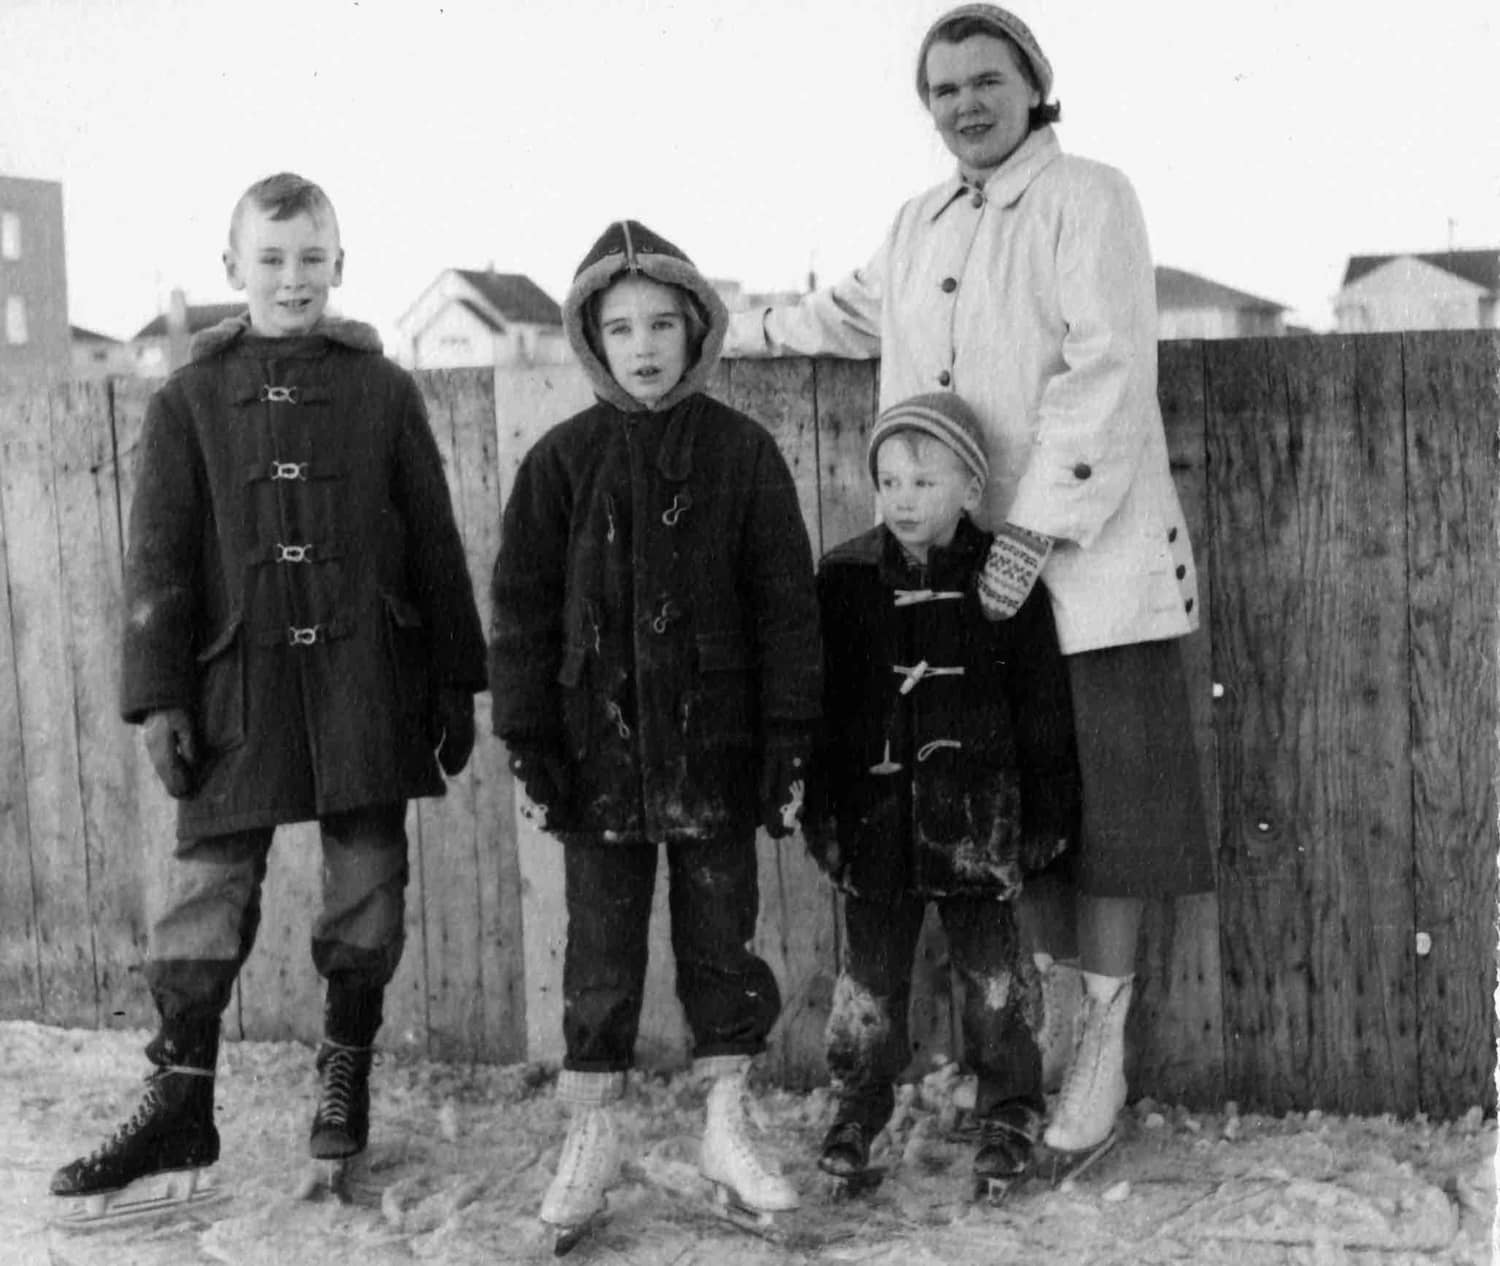 Thelma Pepper in her 30s with her three children, all in skates, standing in front of old ice rink fence.